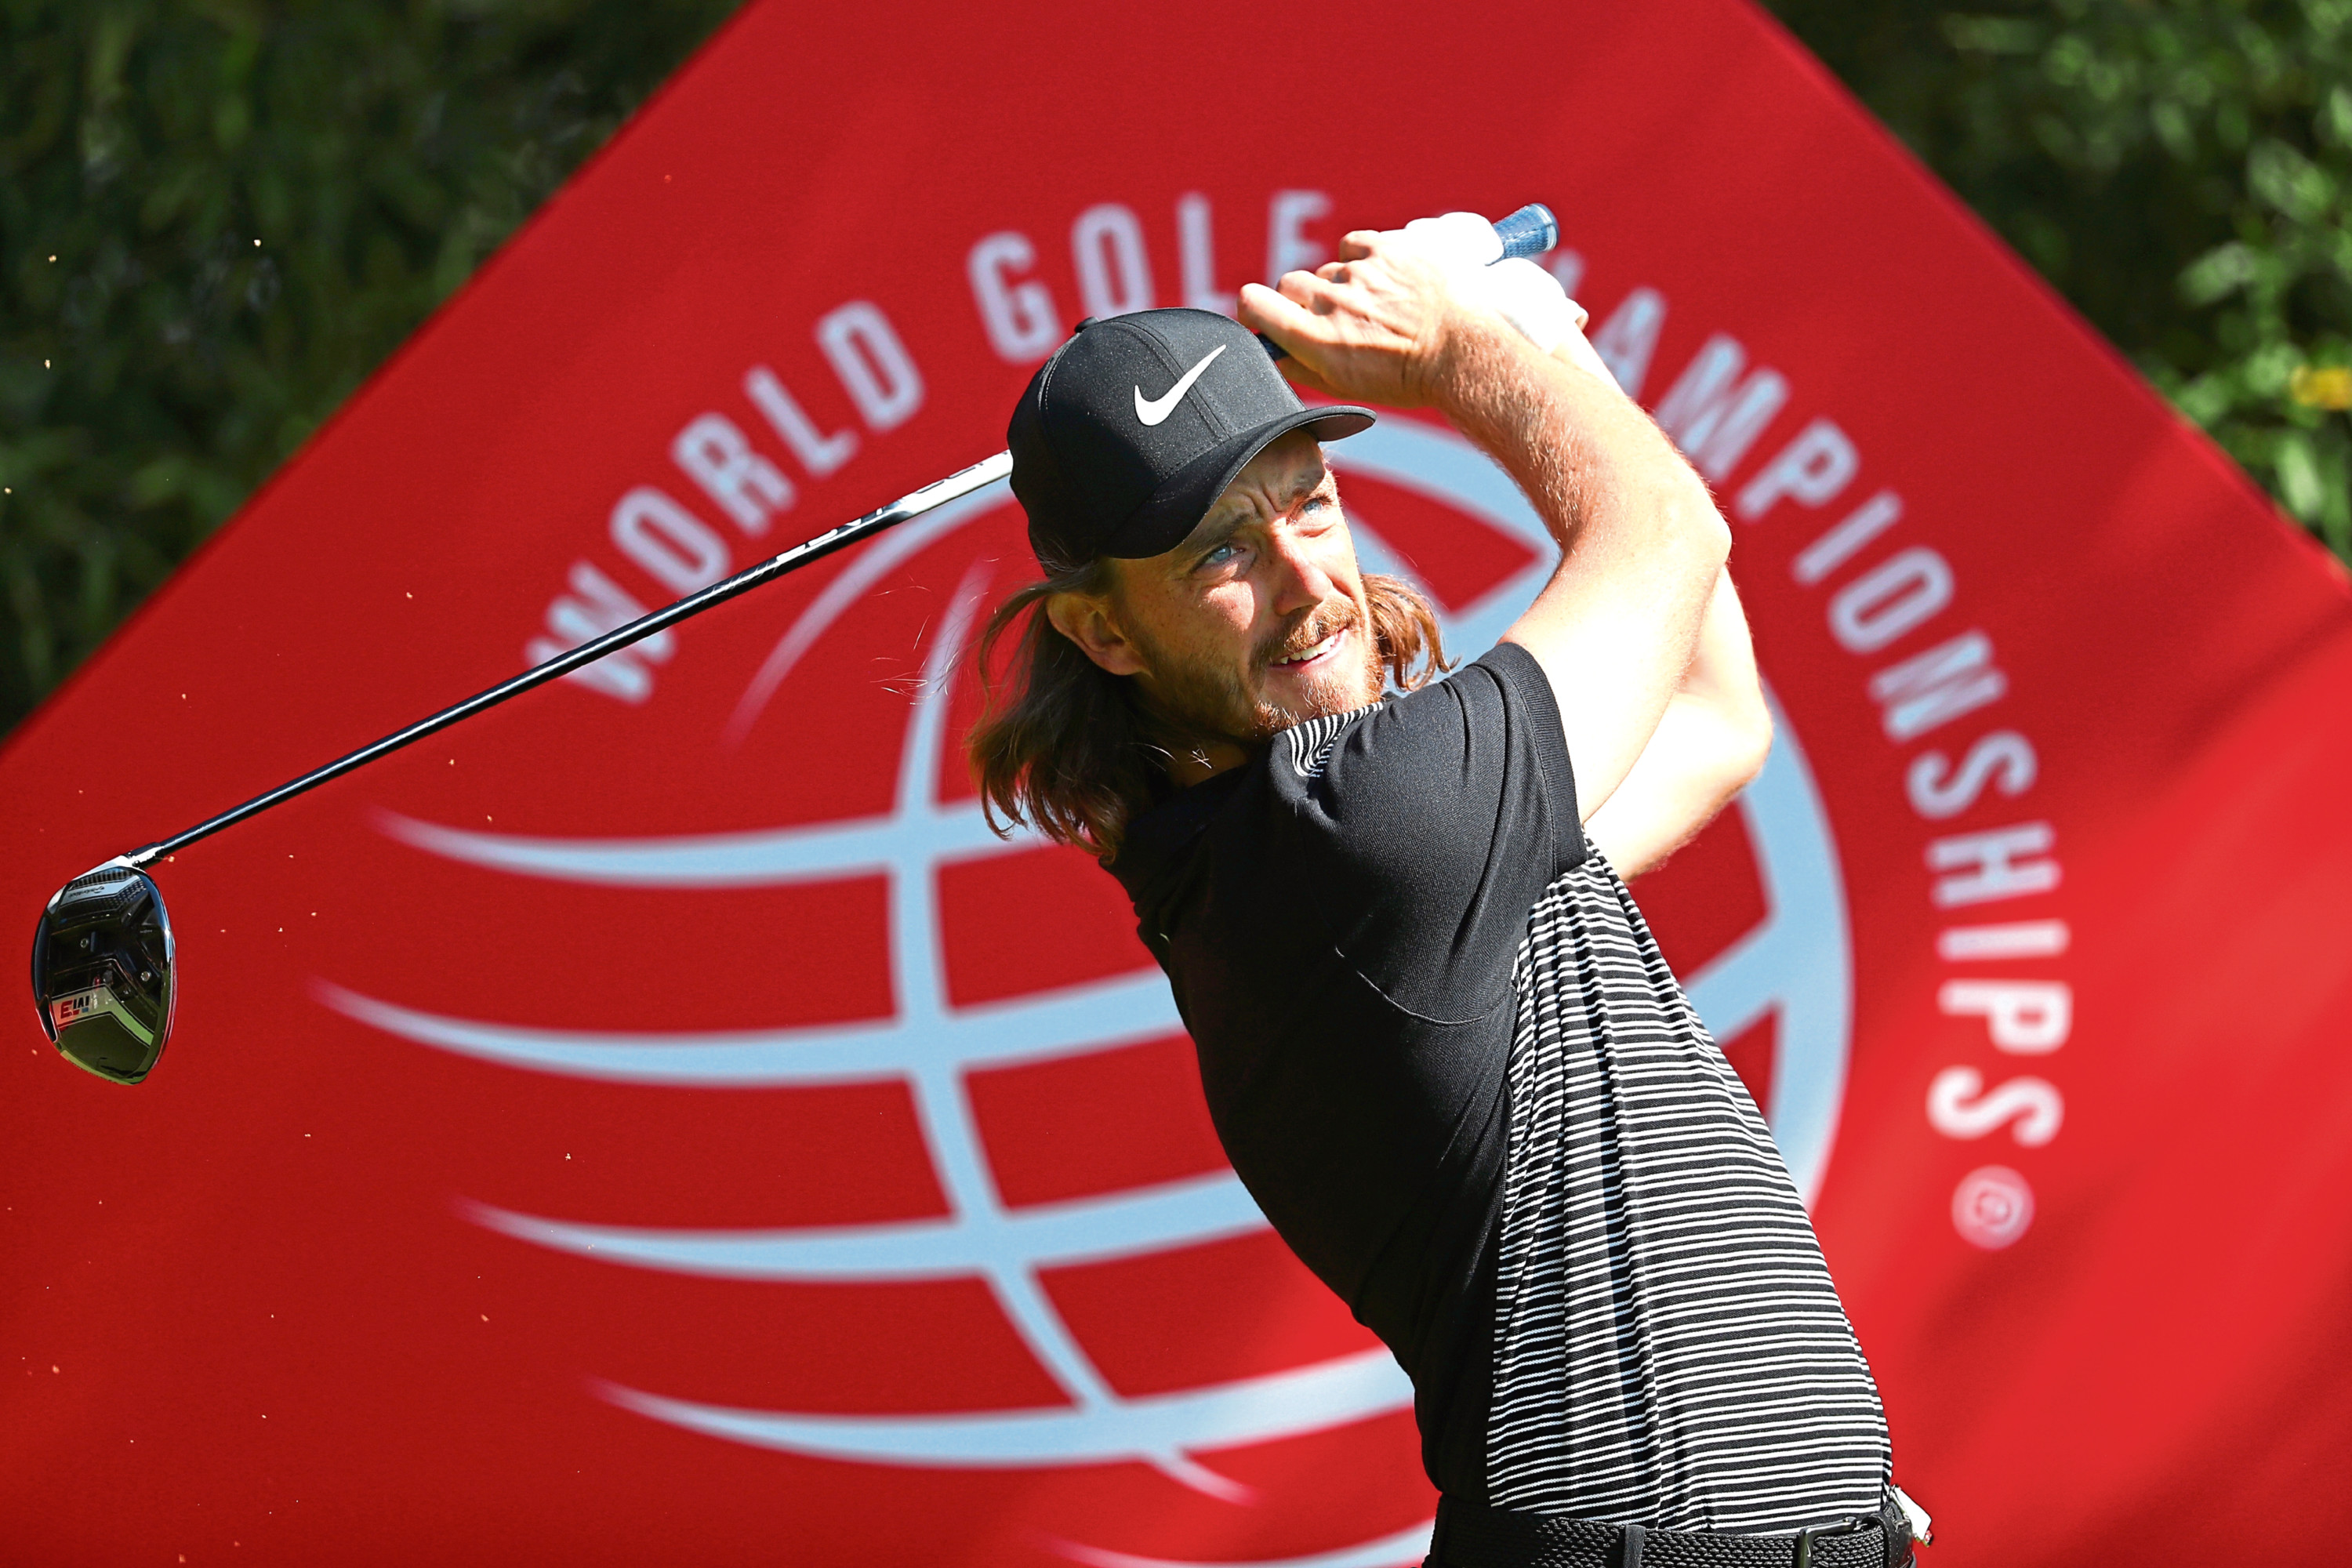 SHANGHAI, CHINA - OCTOBER 28:  Tommy Fleetwood of England plays his shot from the second tee during the final round of the WGC - HSBC Champions at Sheshan International Golf Club on October 28, 2018 in Shanghai, China.  (Photo by Matthew Lewis/Getty Images)